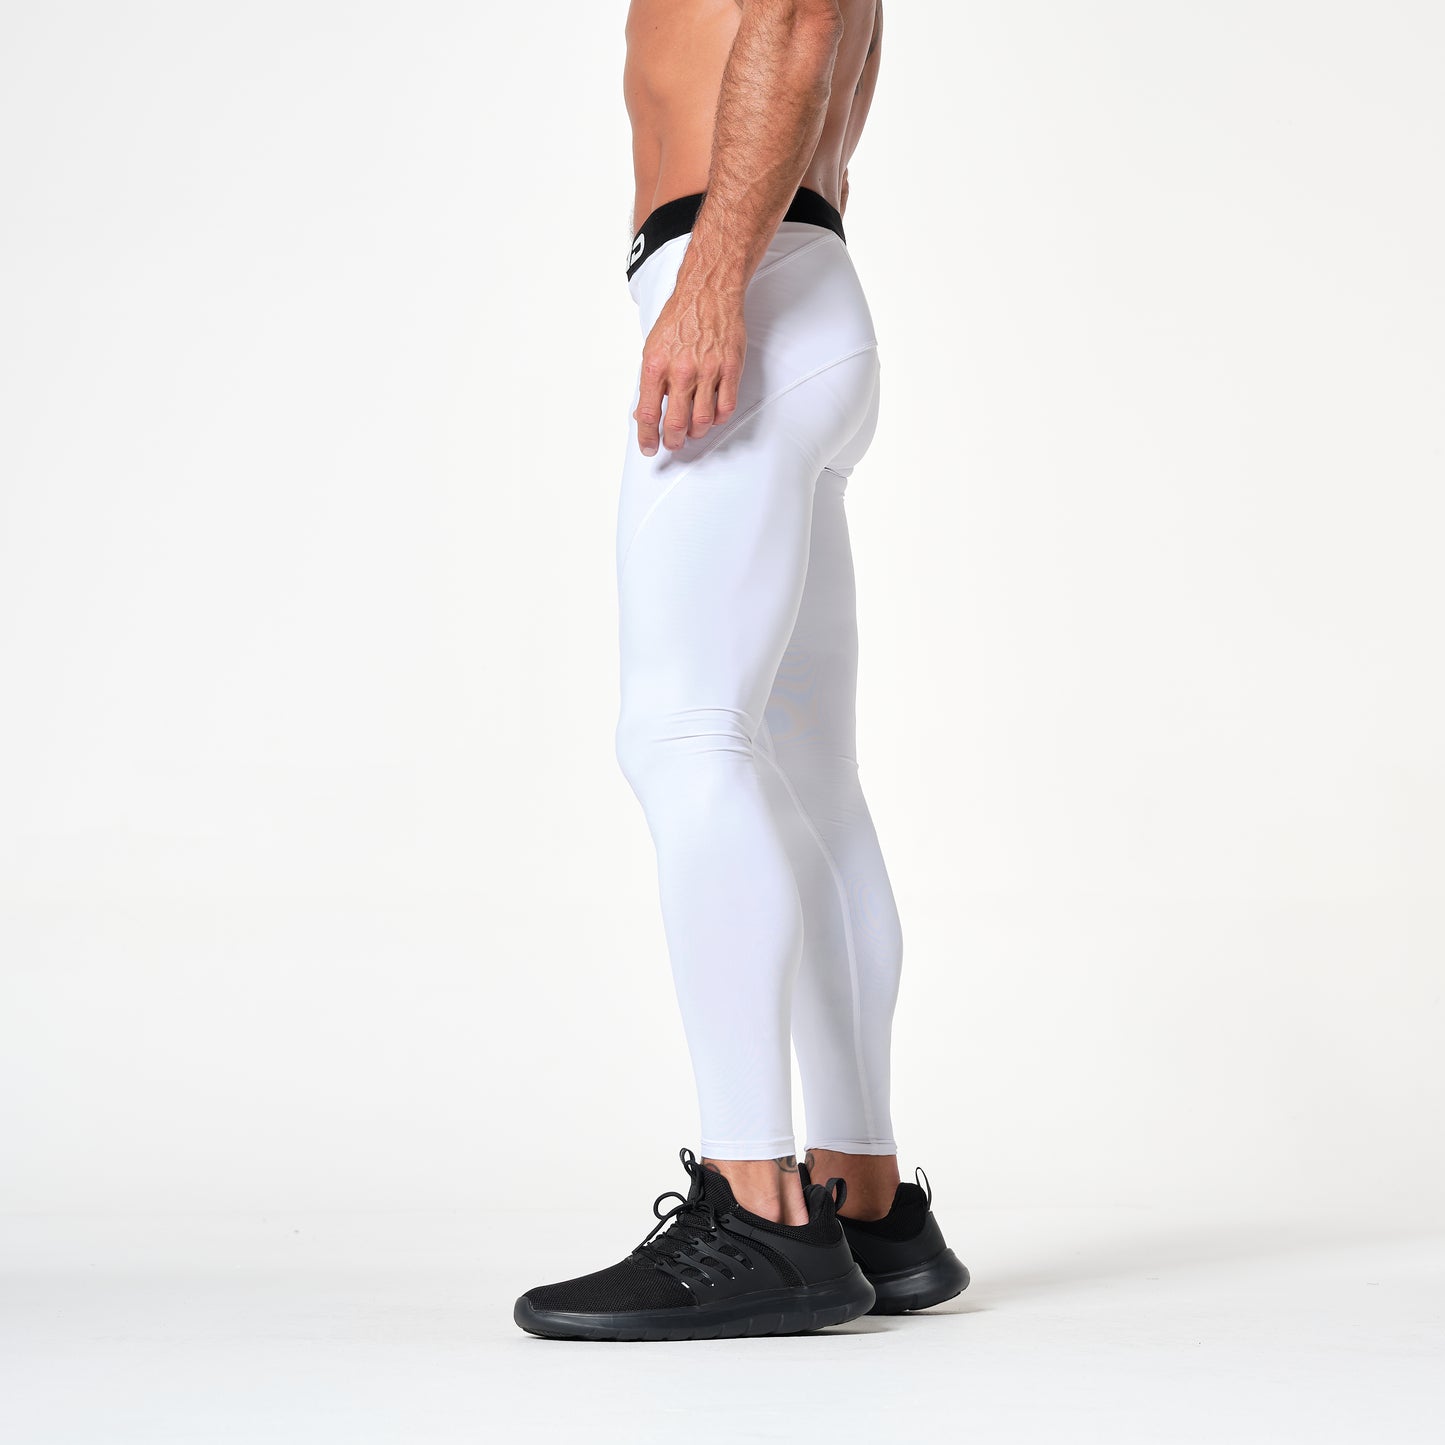 ZEROPOINT ATHLETIC COMPRESSION TIGHTS MEN BLACK WHITE CHARTREUSE